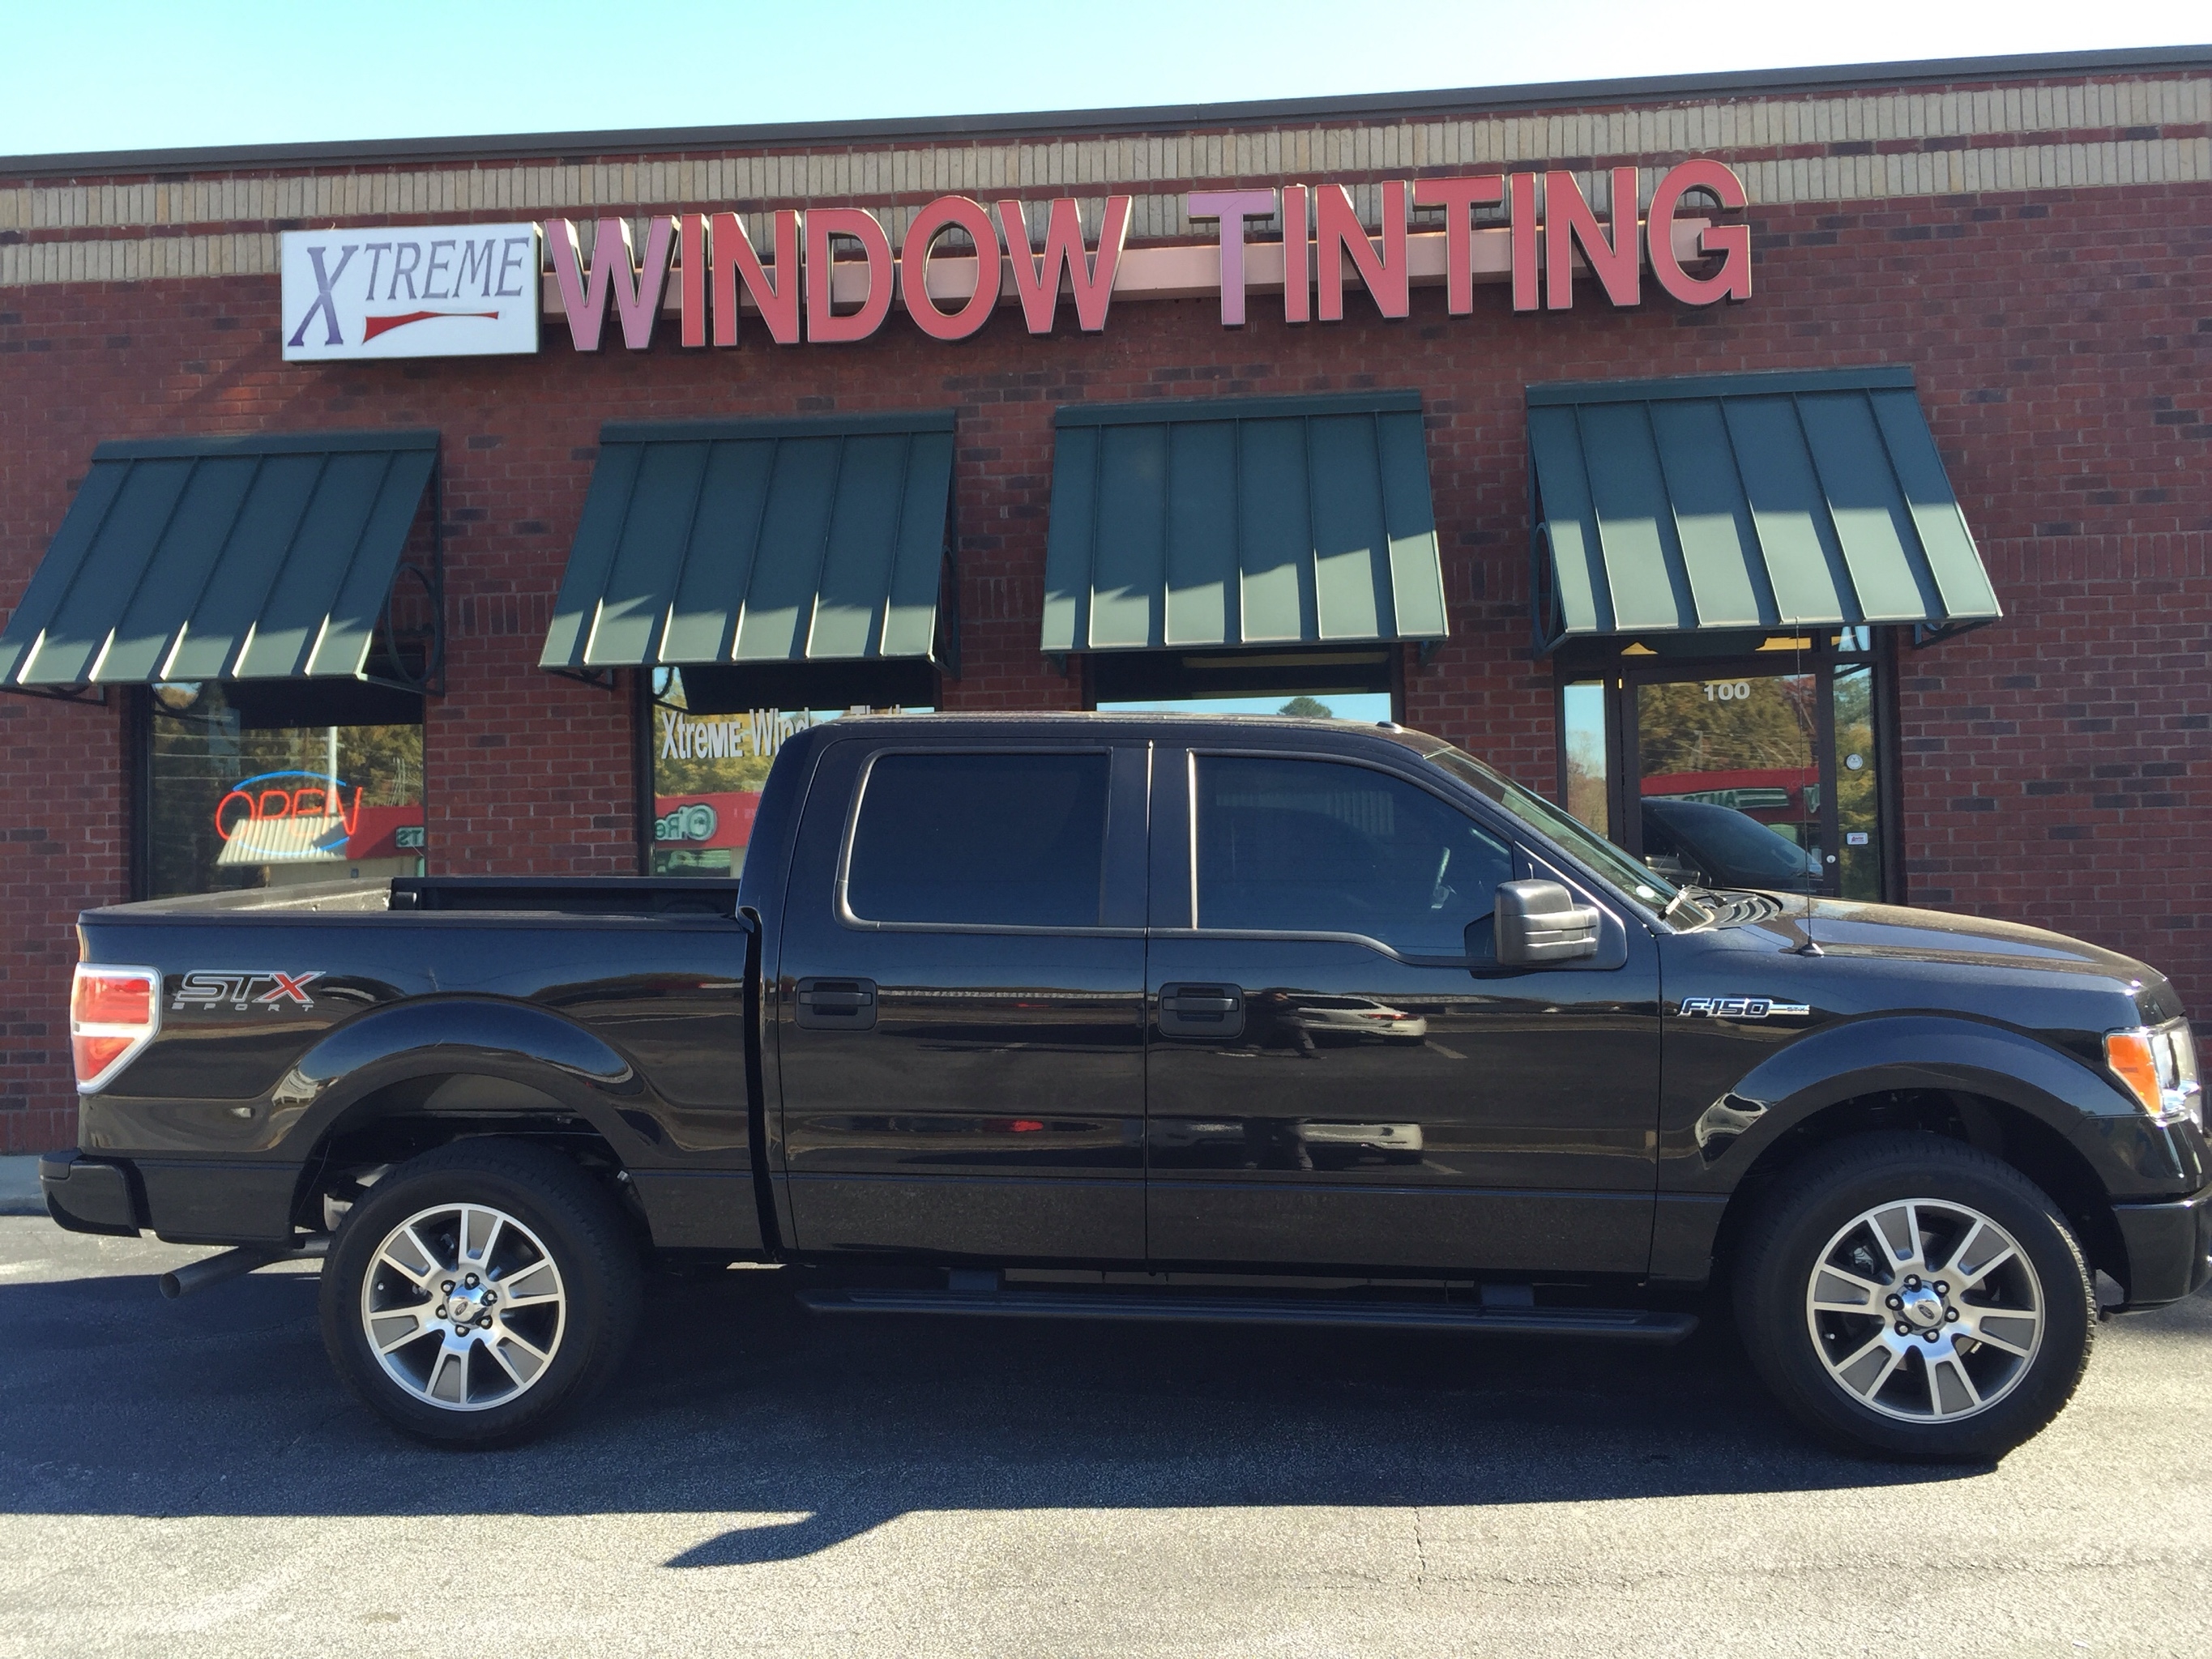 Xtreme Window Tinting - Lawrenceville, GA 30046 - (678)985-9220 | ShowMeLocal.com